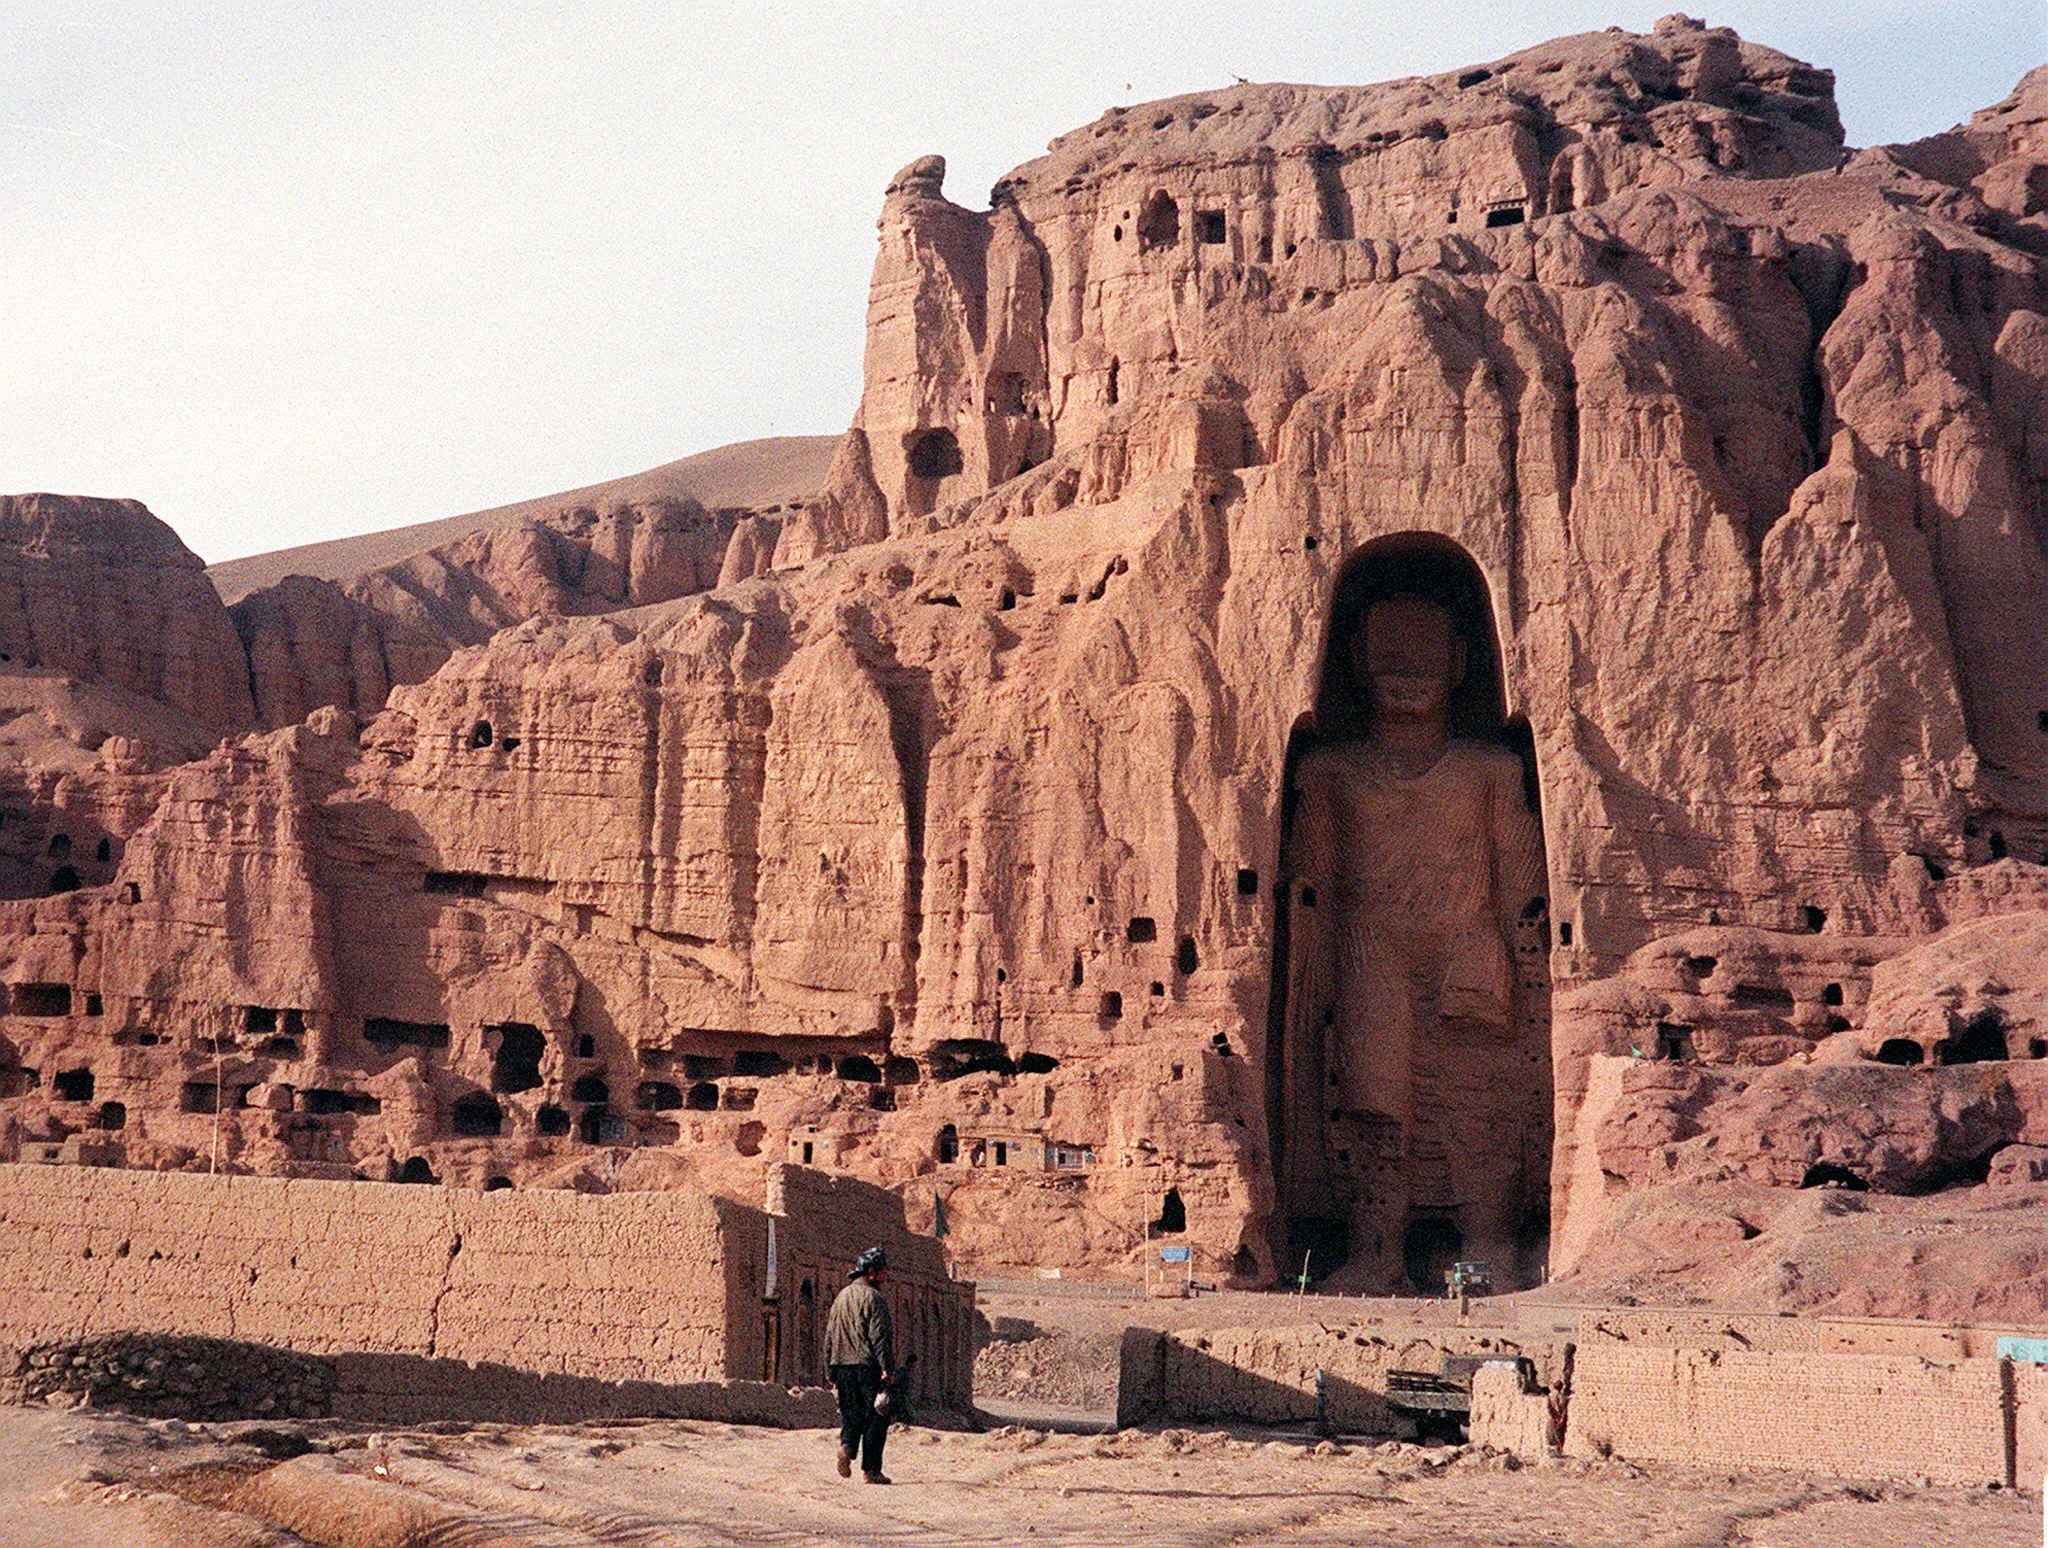 A file photo dated 07 December 1997 shows an Afghan walking near the world's tallest standing statue of Buddha in Bamiyan province of Afghanistan